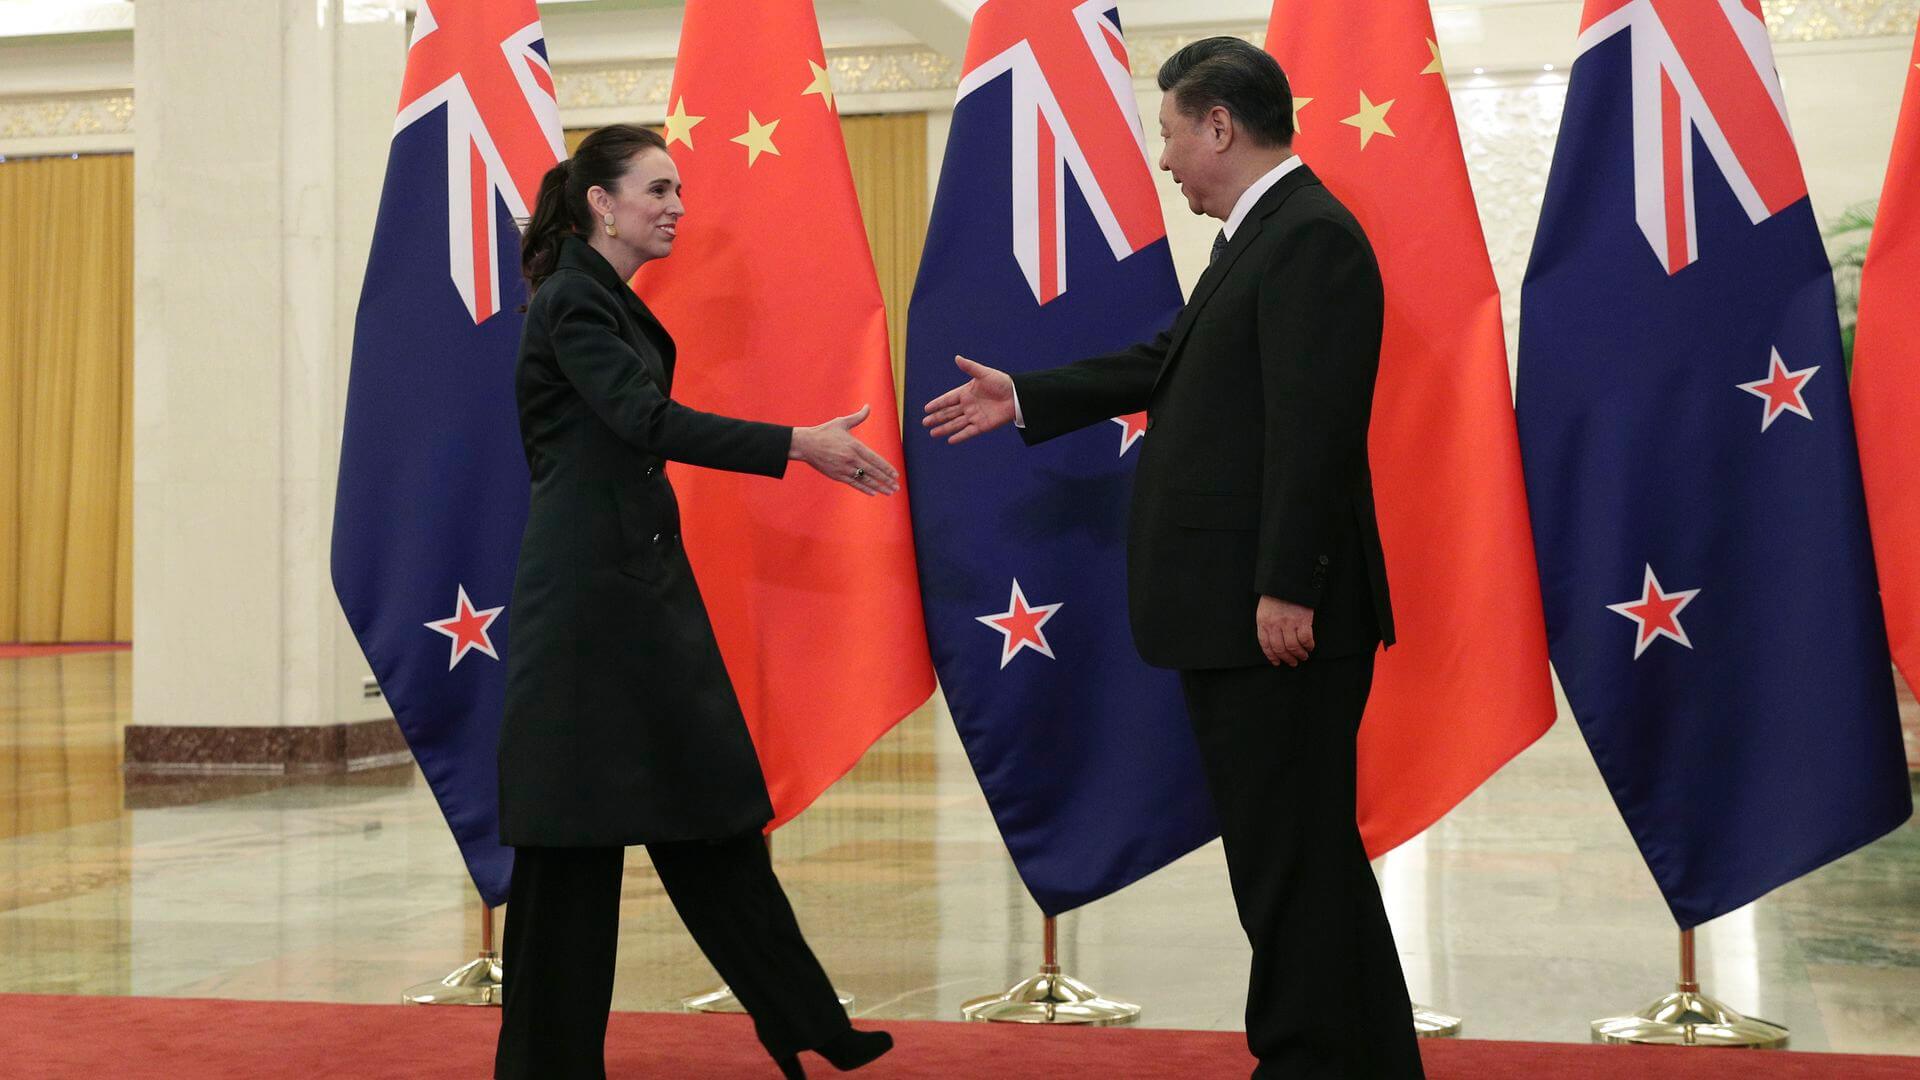 NZ PM Ardern Says China’s Divergent Interests and Values “Becoming Harder to Reconcile”